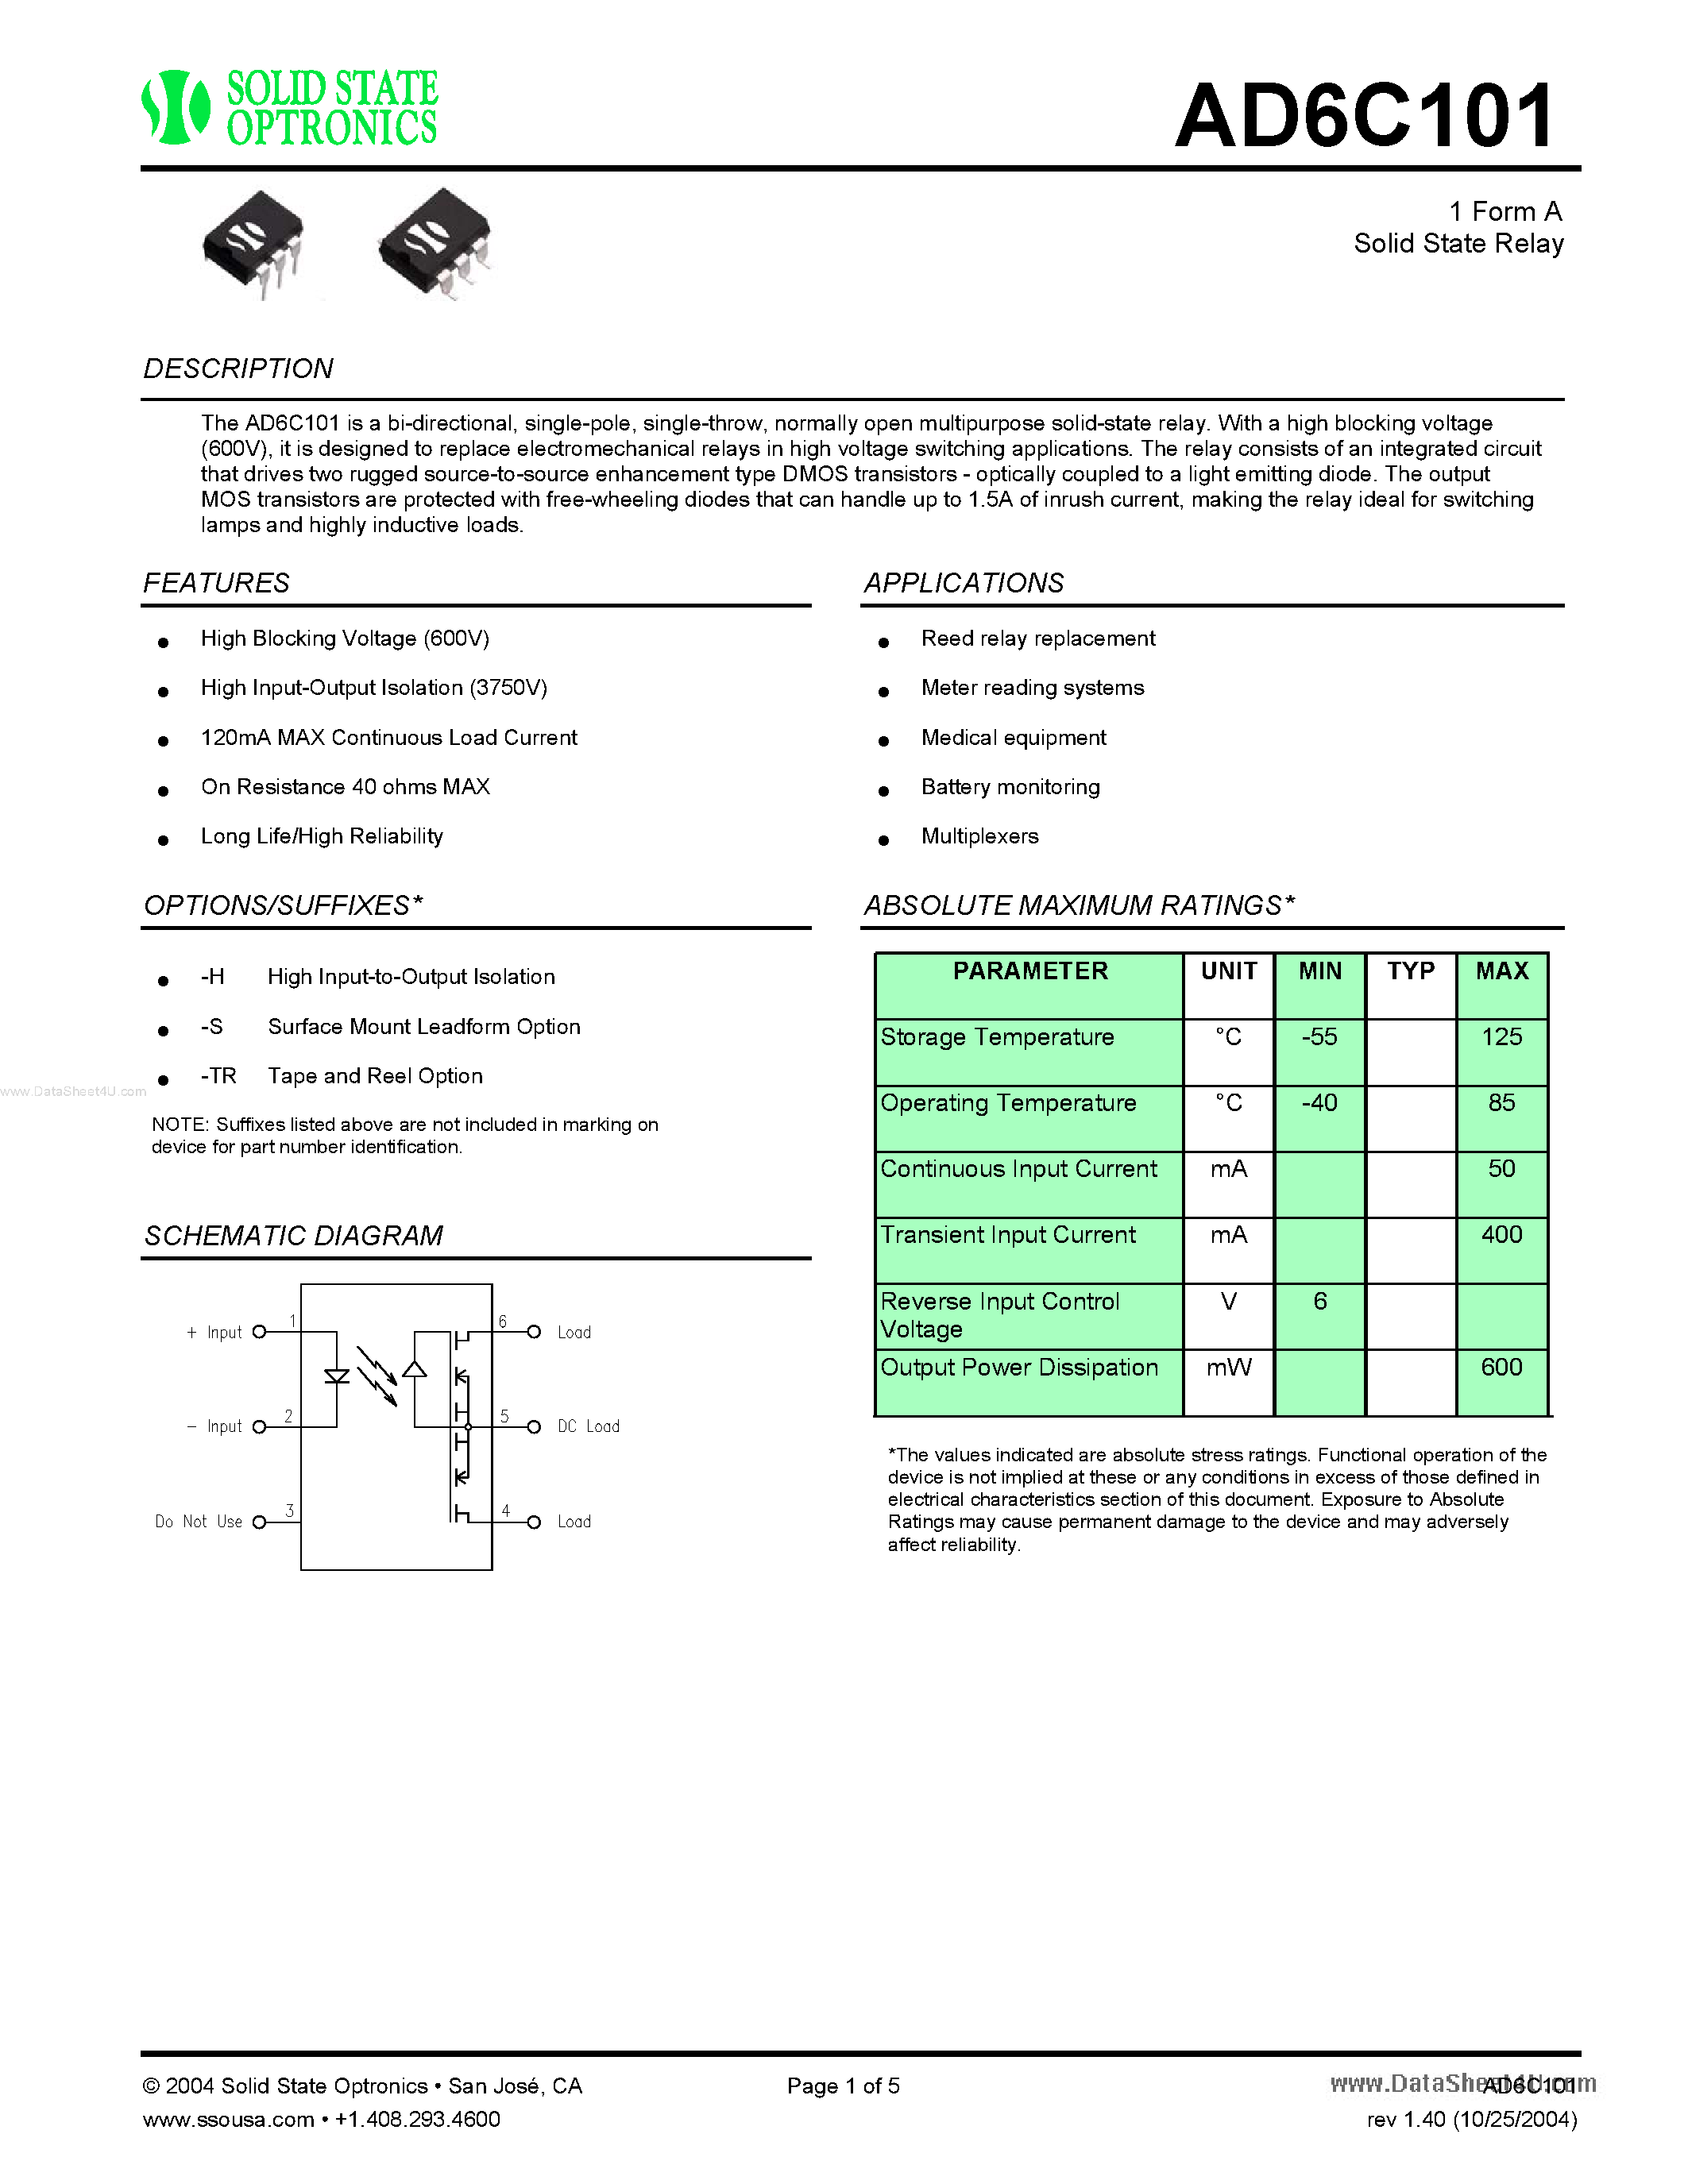 Datasheet AD6C101 - 1 Form A Solid State Relay page 1